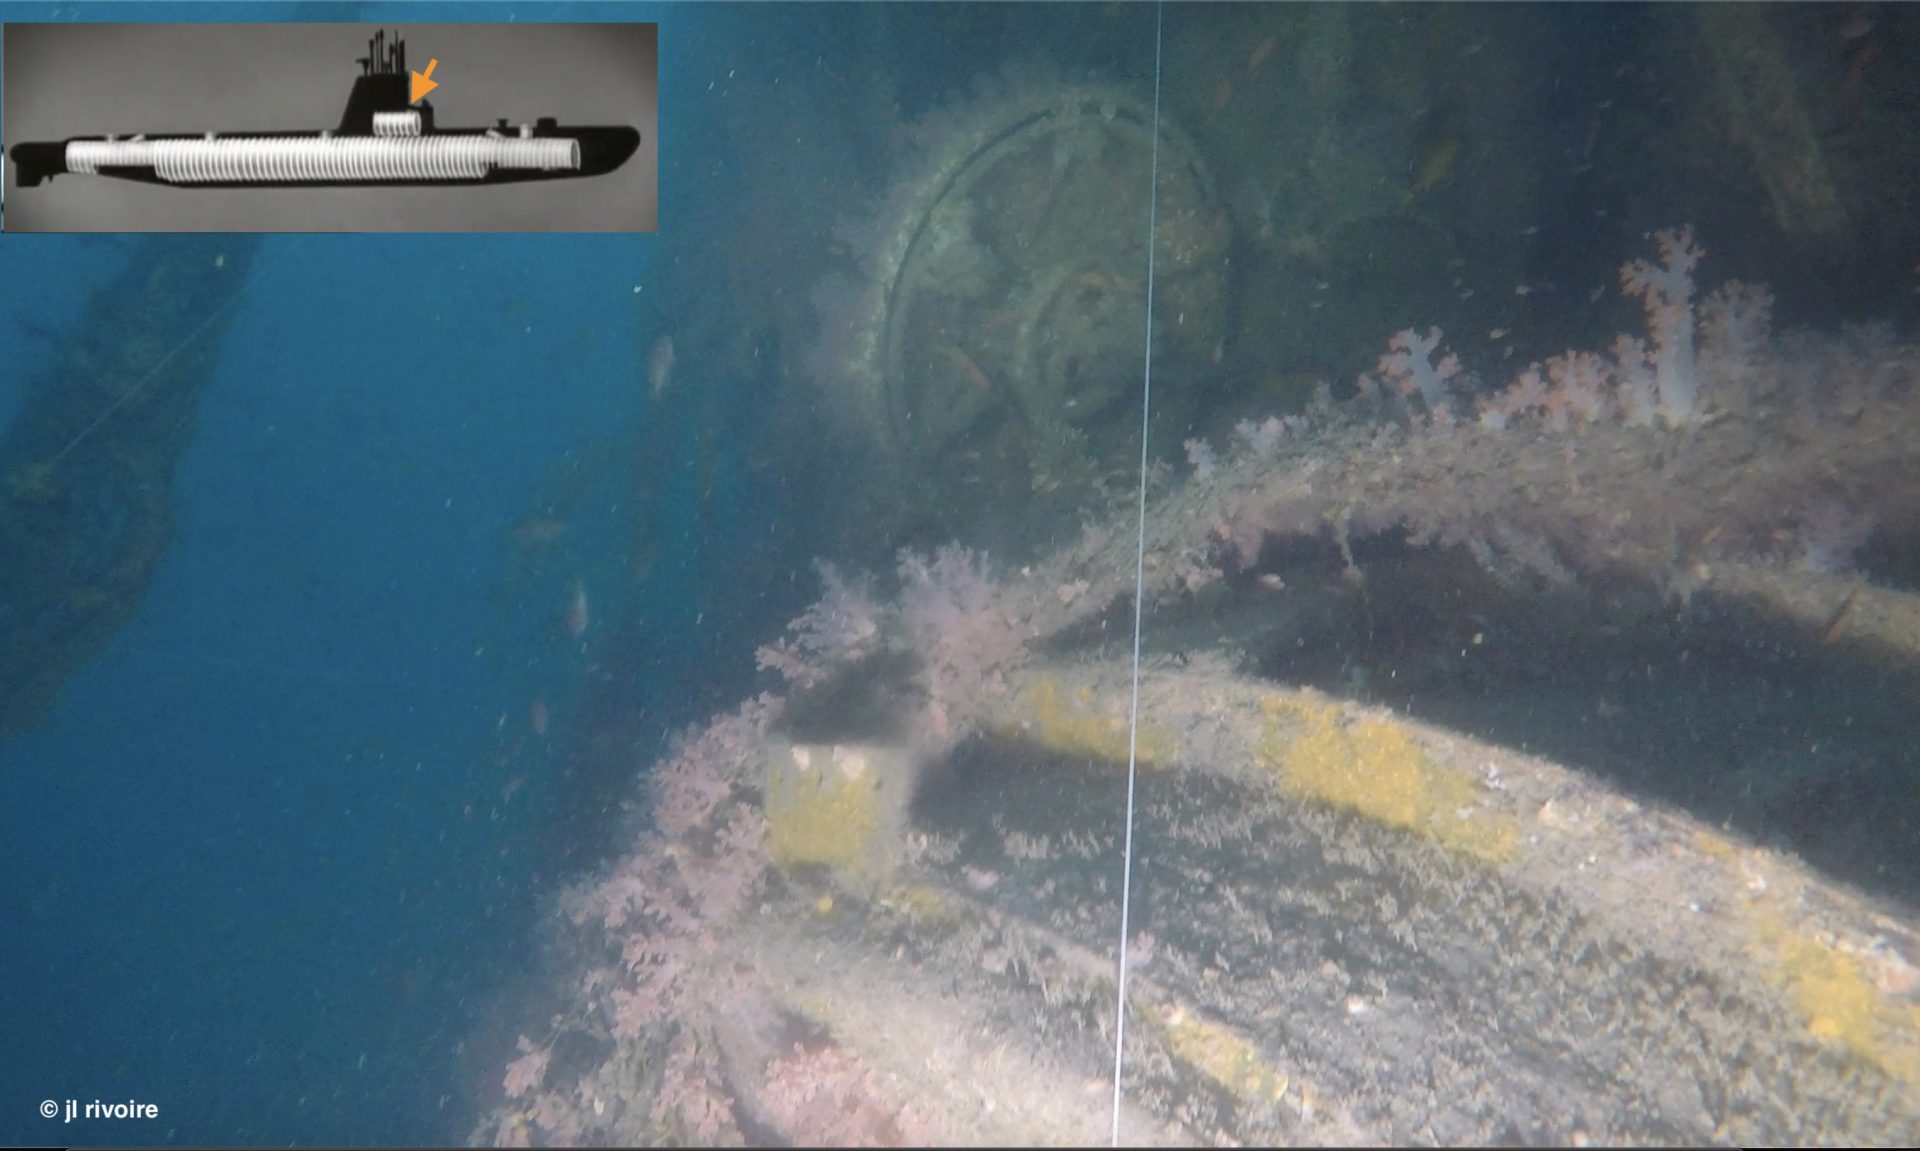 Divers secret agent lost WWII submarine rupture off Southeast Asia